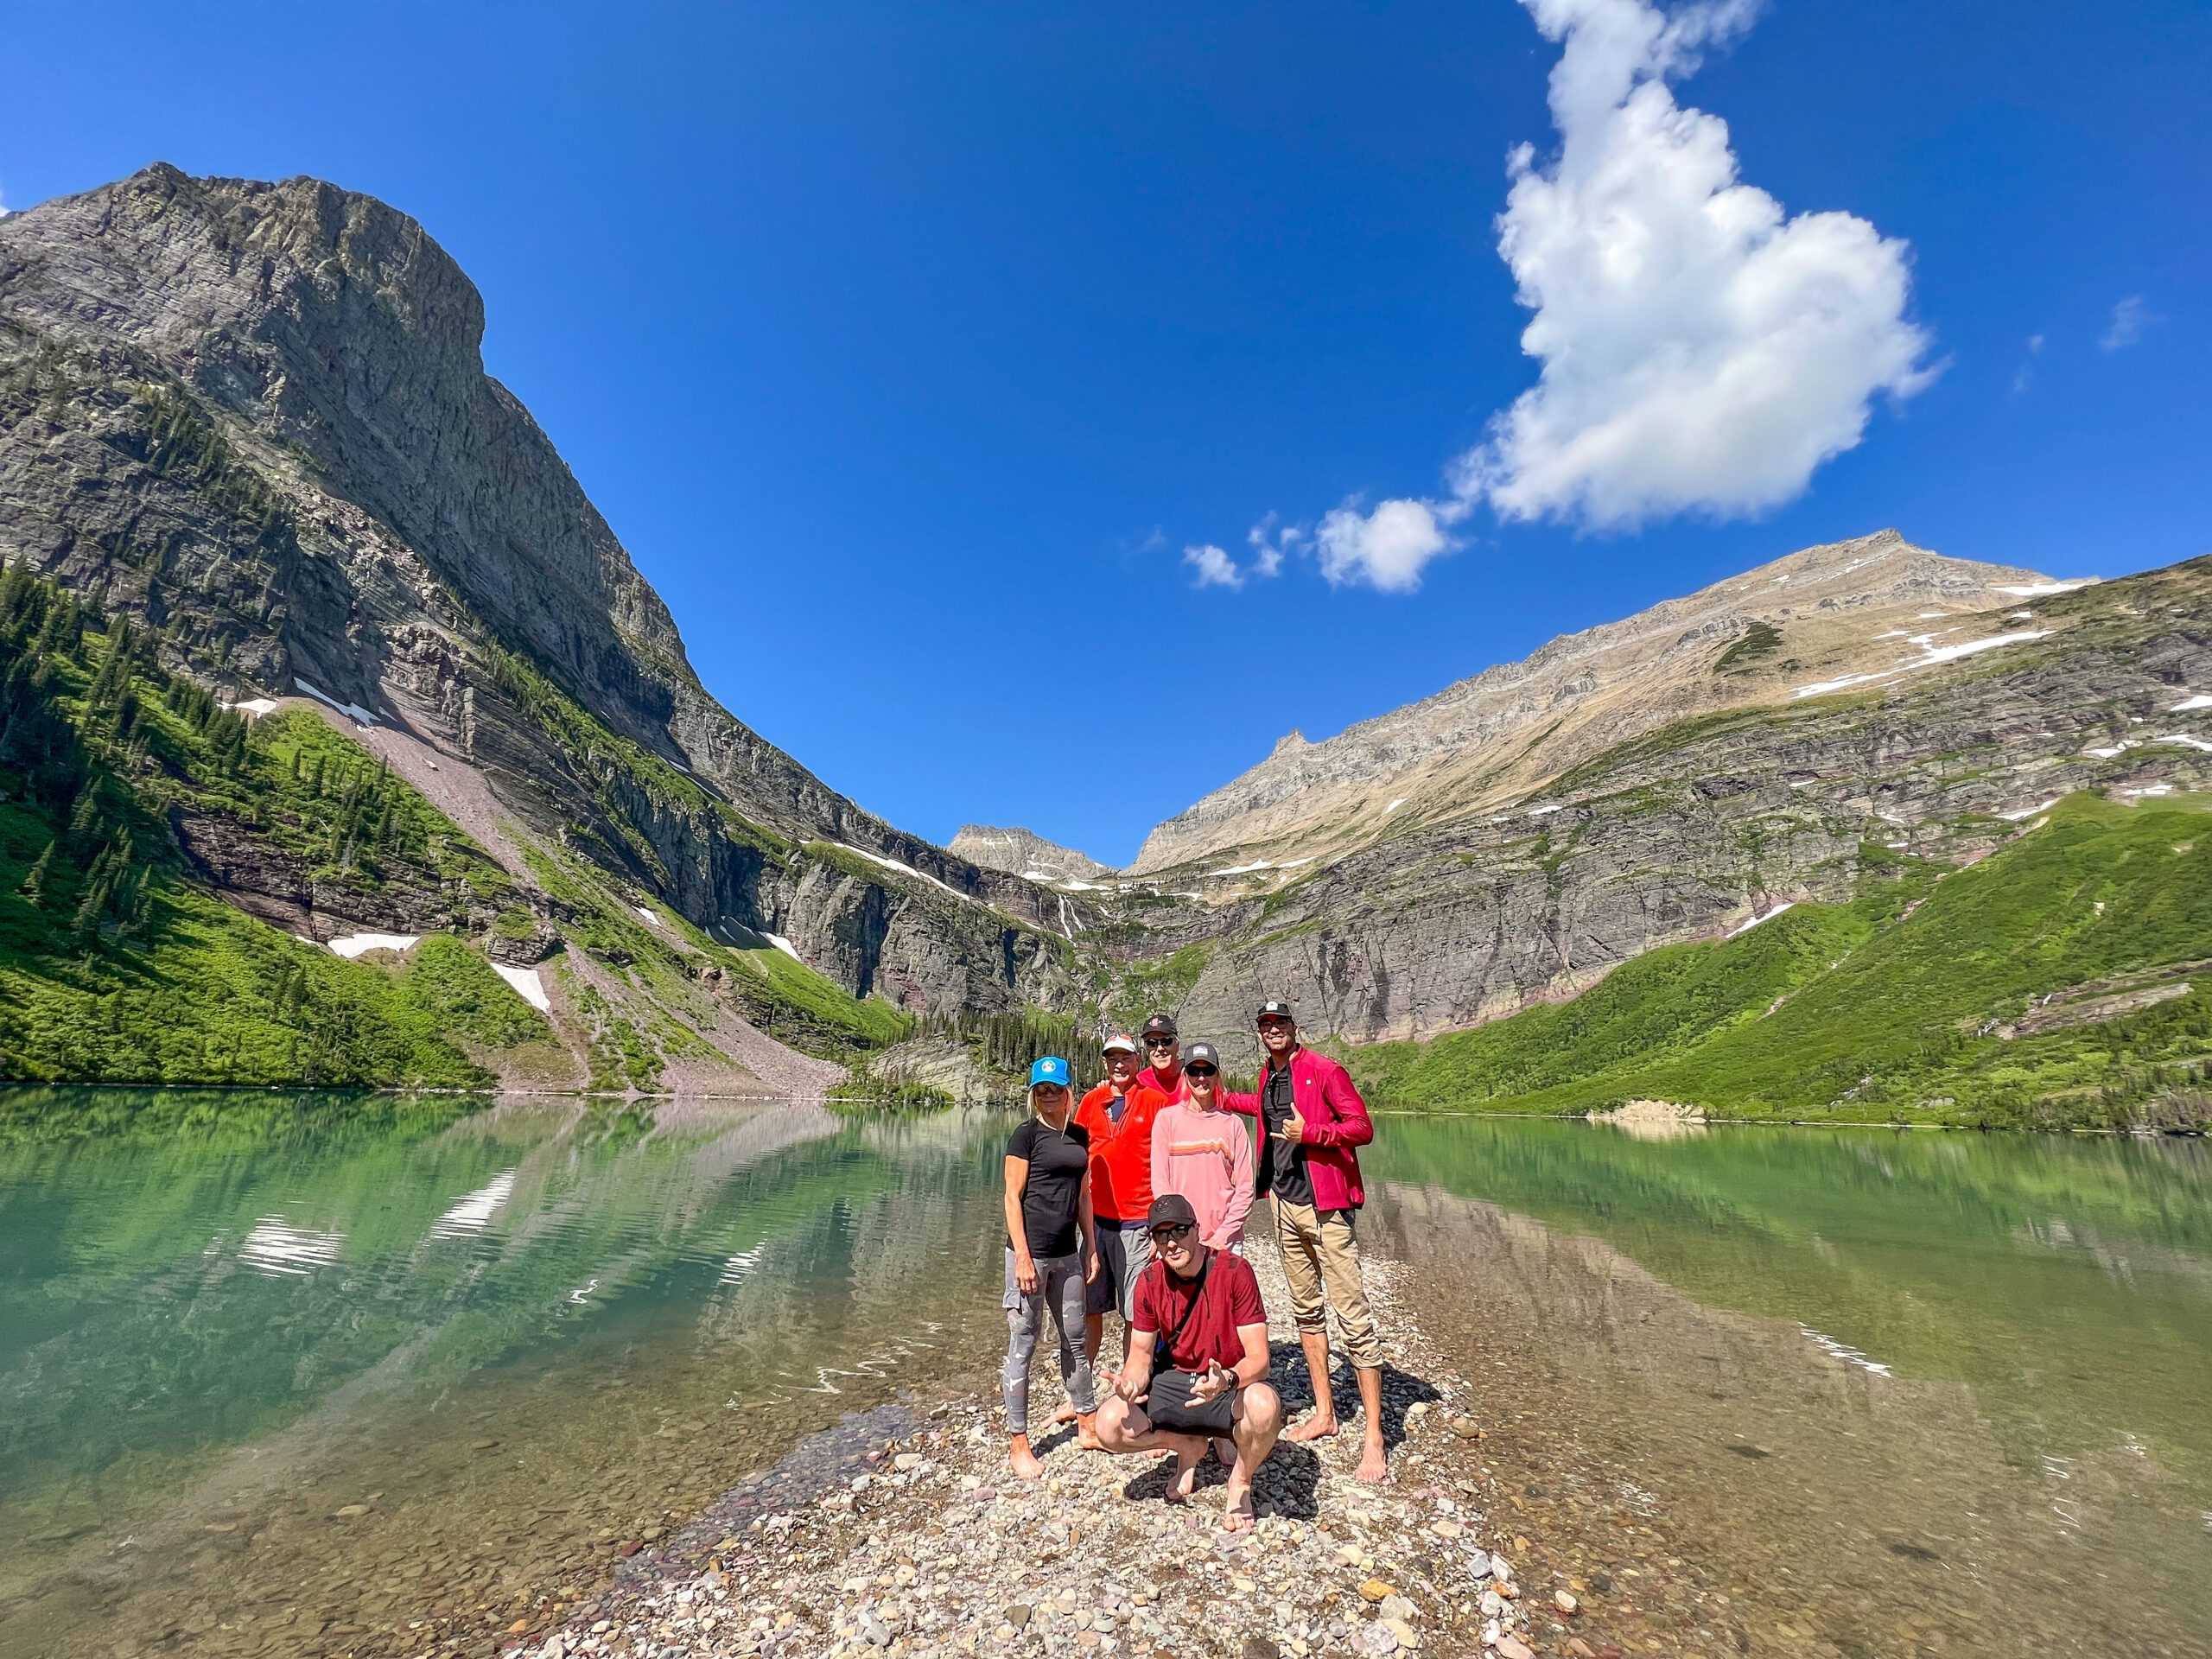 Experience an iconic hike in Glacier National Park